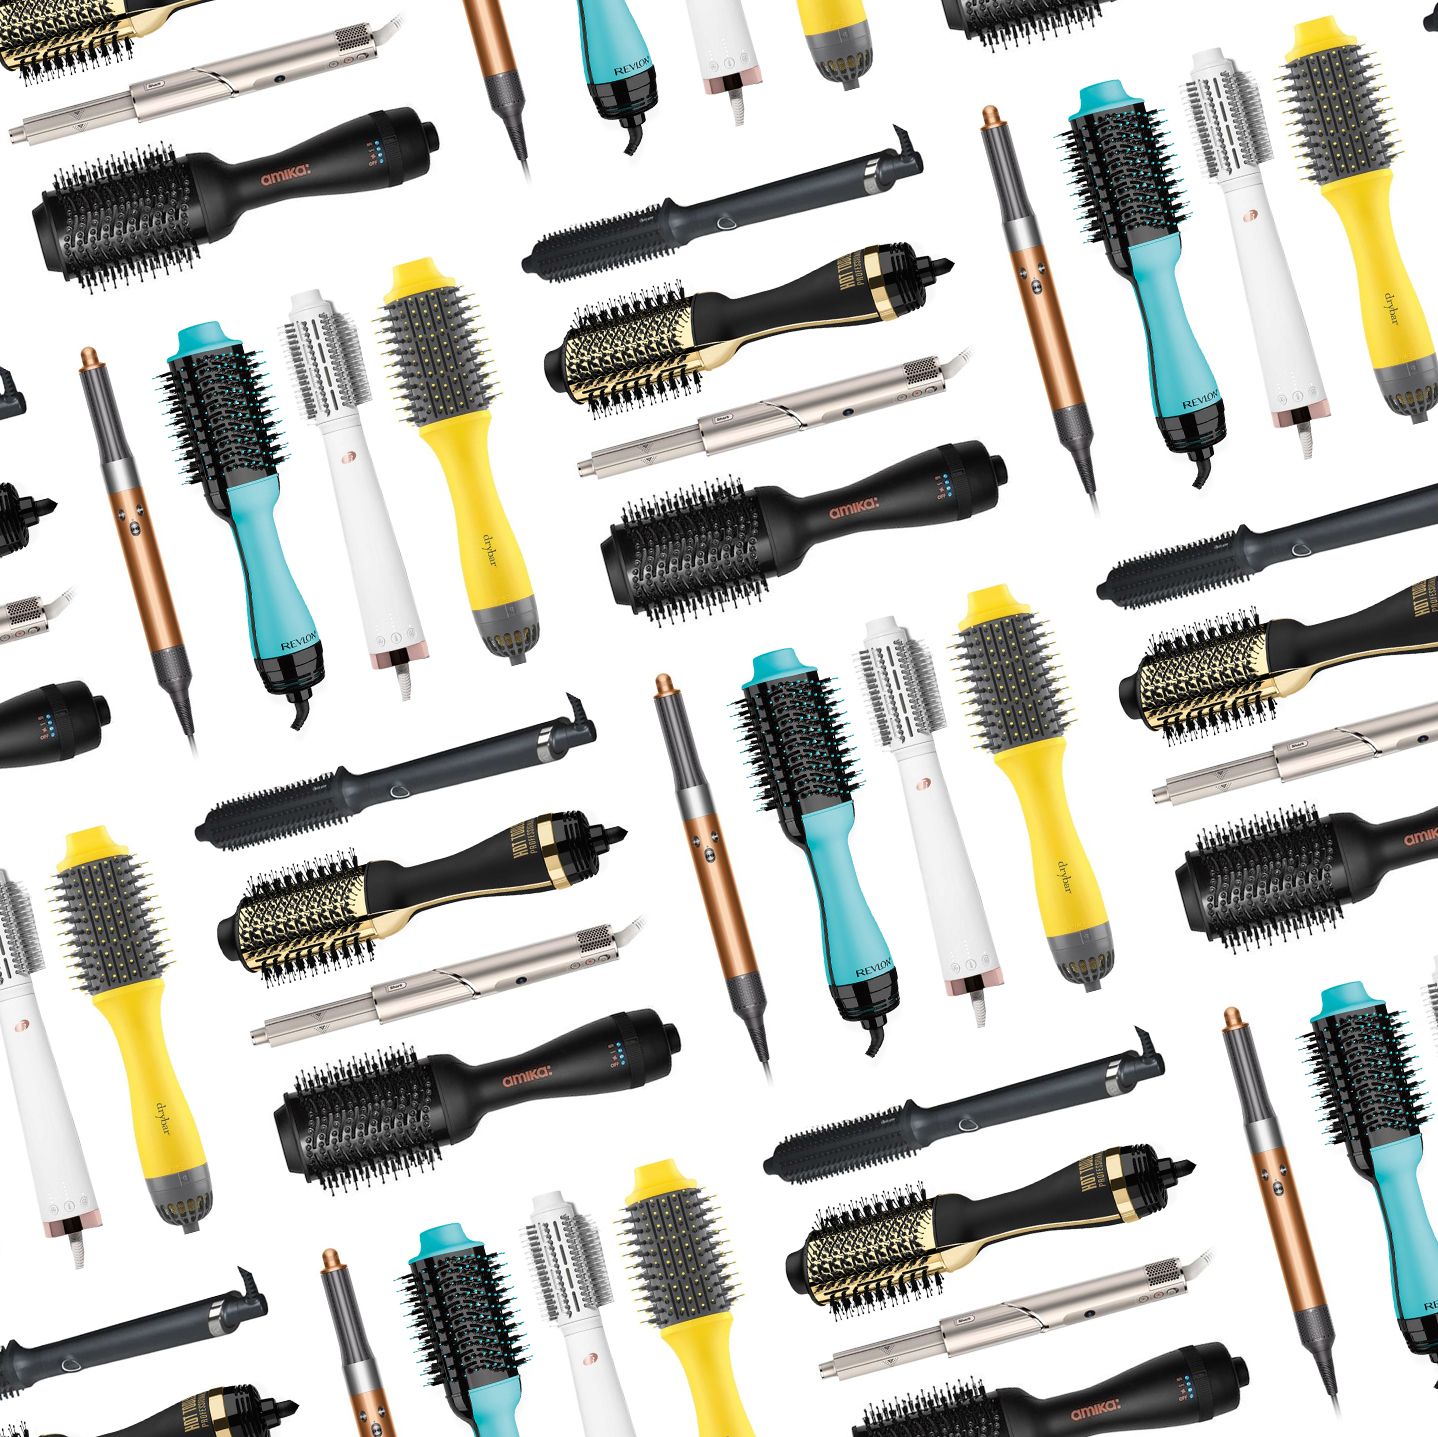 In Search of the Best HairDryer Brush